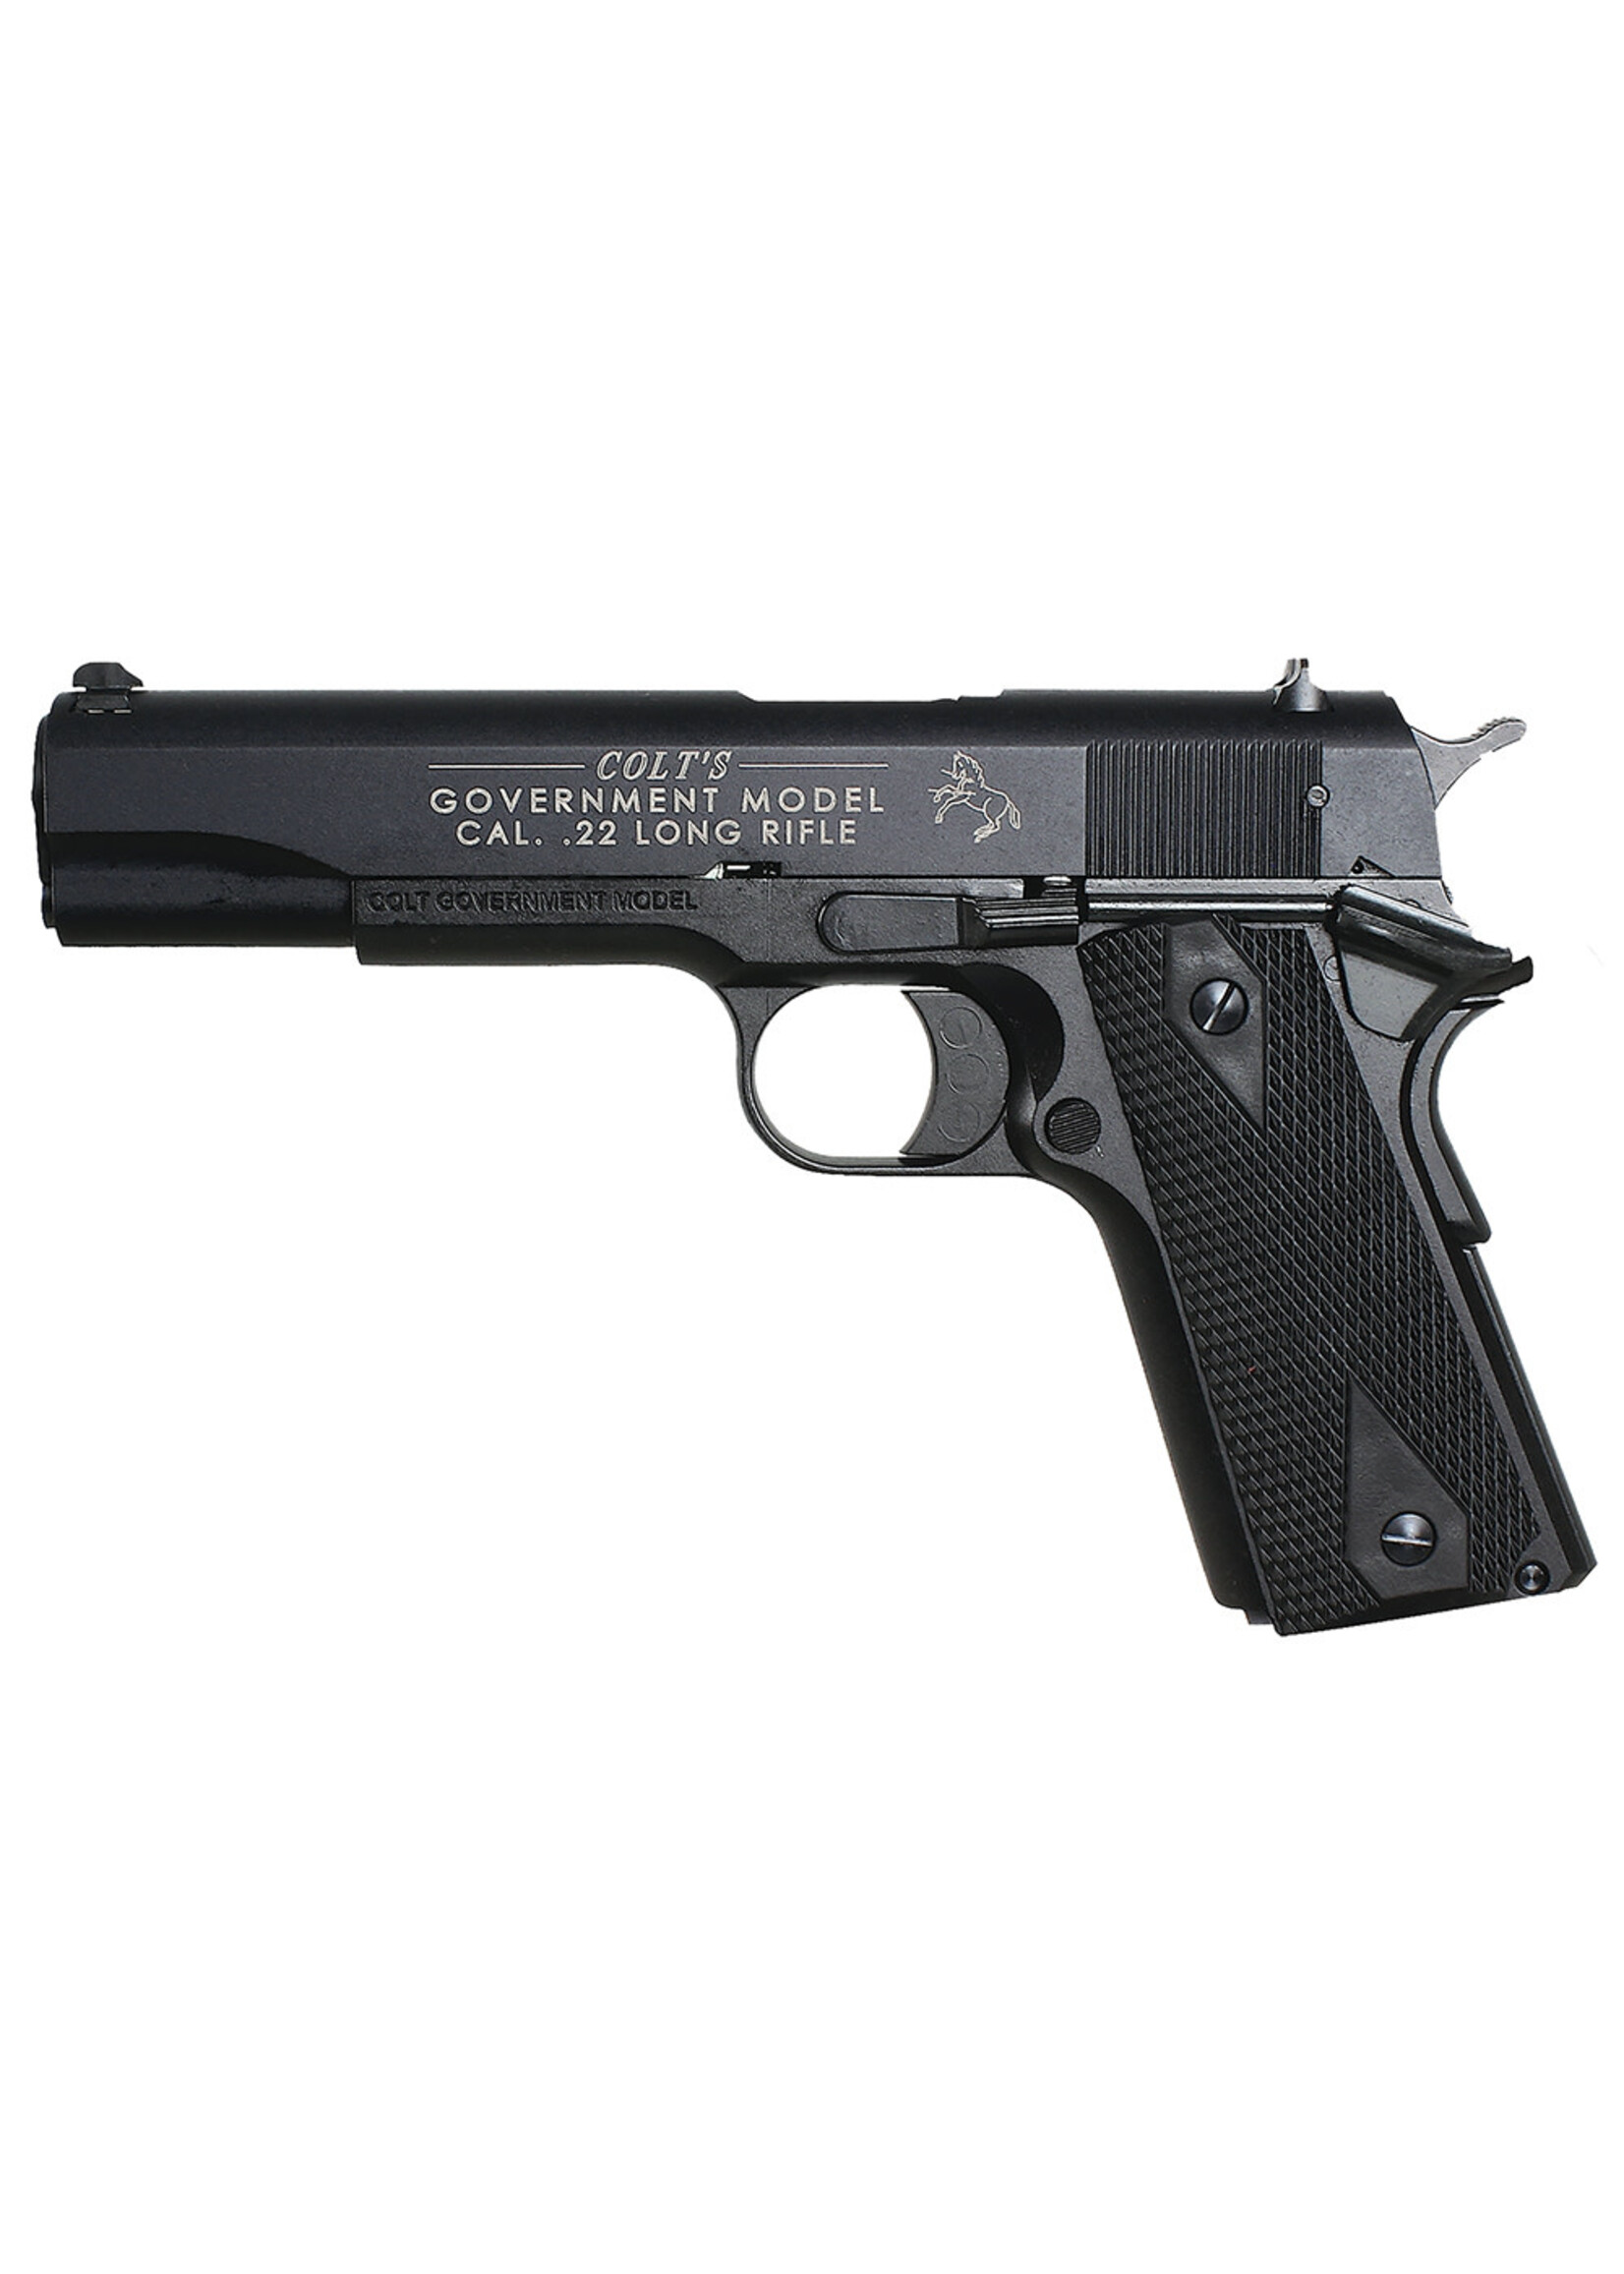 Walther Walther Arms 5170304 1911 Colt Government A1 22 LR 12+1 5" Matte Black Tenifer Serrated/Steel Slide, Black Zinc Alloy Frame w/Beavertail, Black Checkered Polymer Grips